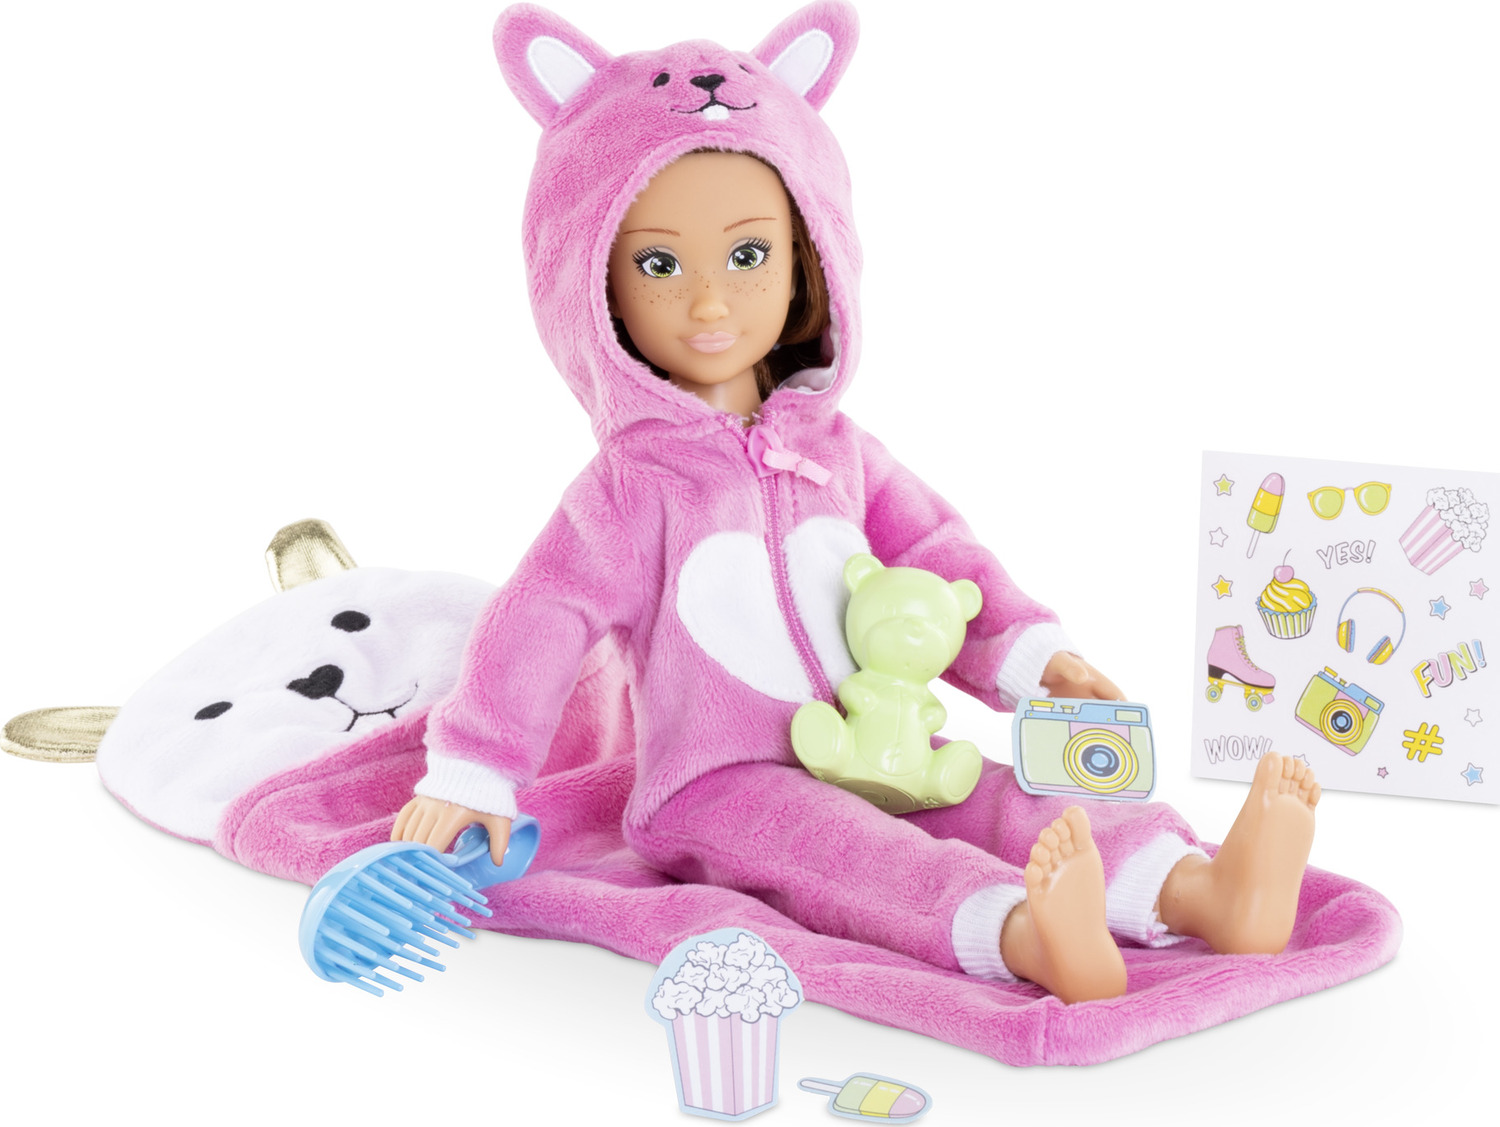 Corolle Girls Zoe Pajama Party Set - The Toy Box Hanover